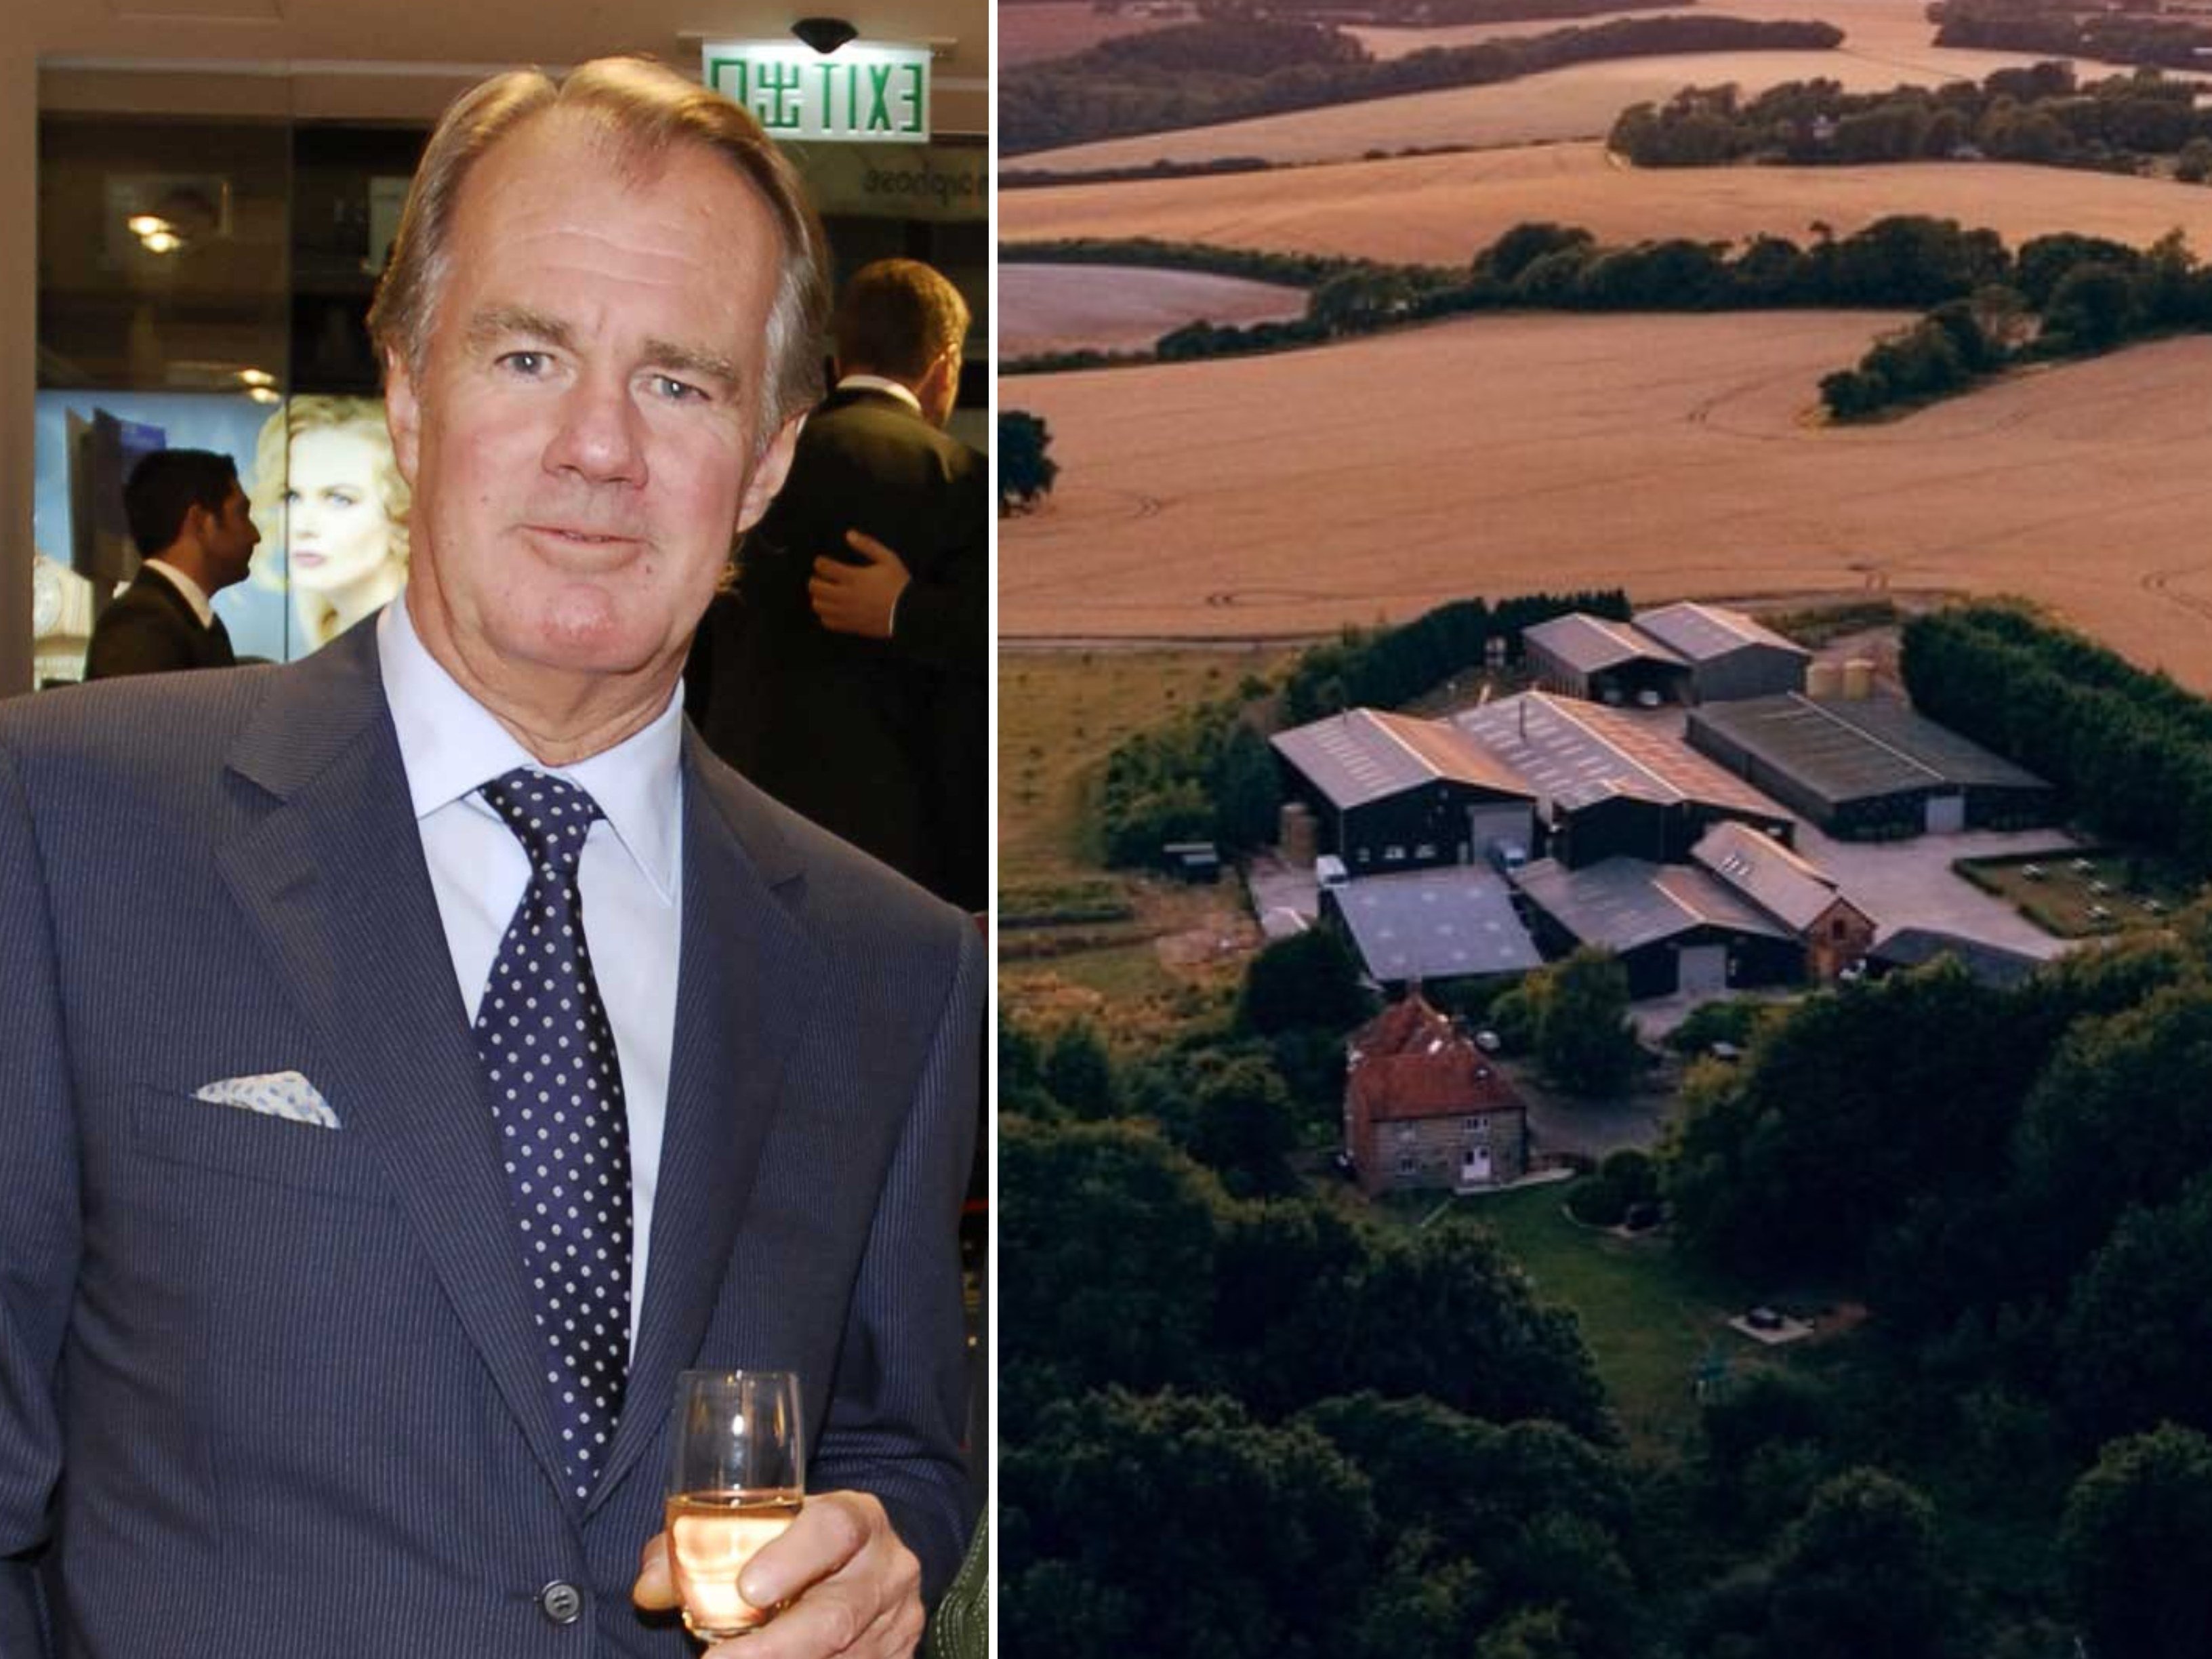 Sweden’s richest person, H&M’s Stefan Persson, bought a 1,200-hectare (3,000-acre) country estate in Wiltshire, southern England, in 1997, and has grown his holdings to 7,700 hectares (19,000 acres) in the years since. Photos: Moxie Communications; @ramsburybrewery/Instagram